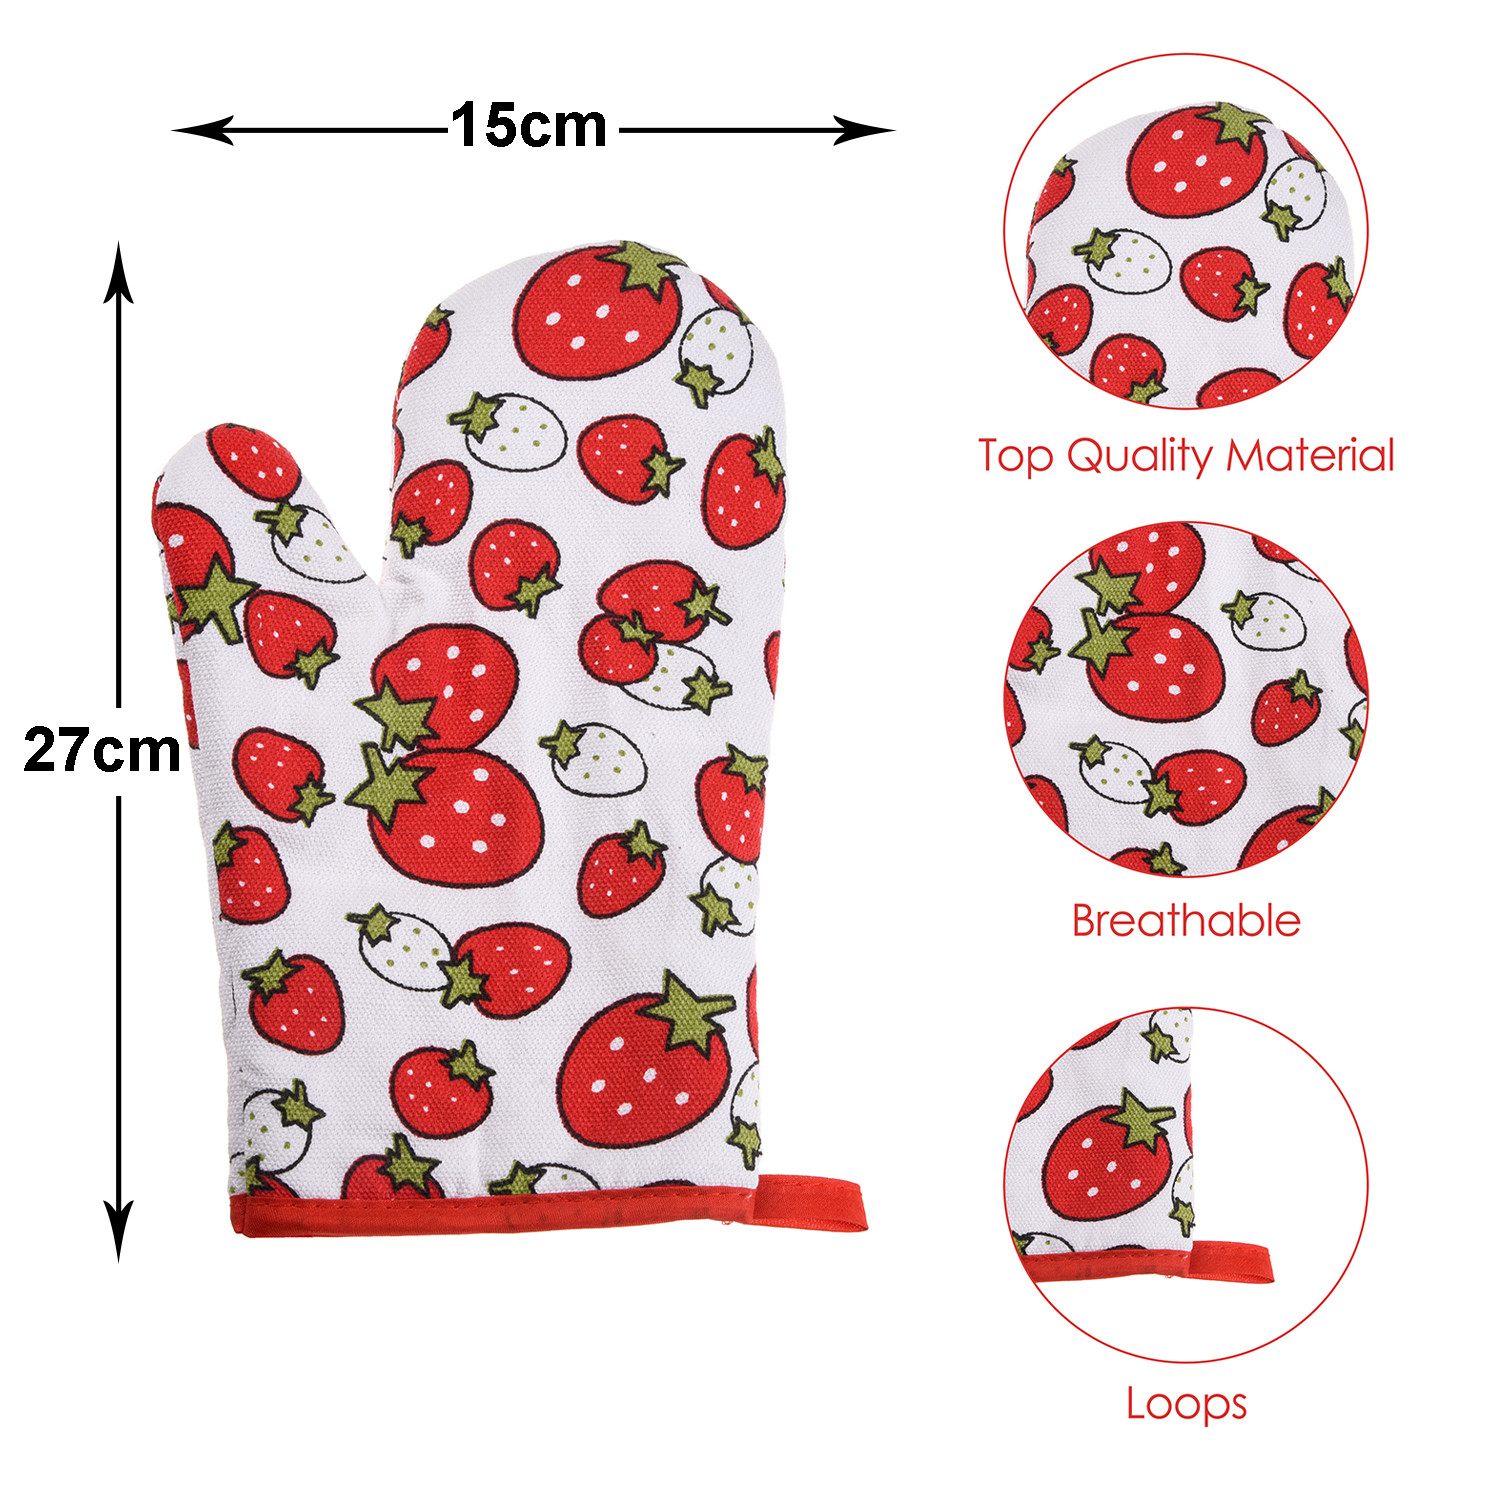 Kuber Industries Oven Mitts|Cotton Microwave Oven Insulated Gloves|Strawberry Print Hanging Loop Kitchen Oven|Heat Resistant|Microwave Gloves For Kitchen|1 Pair (White)